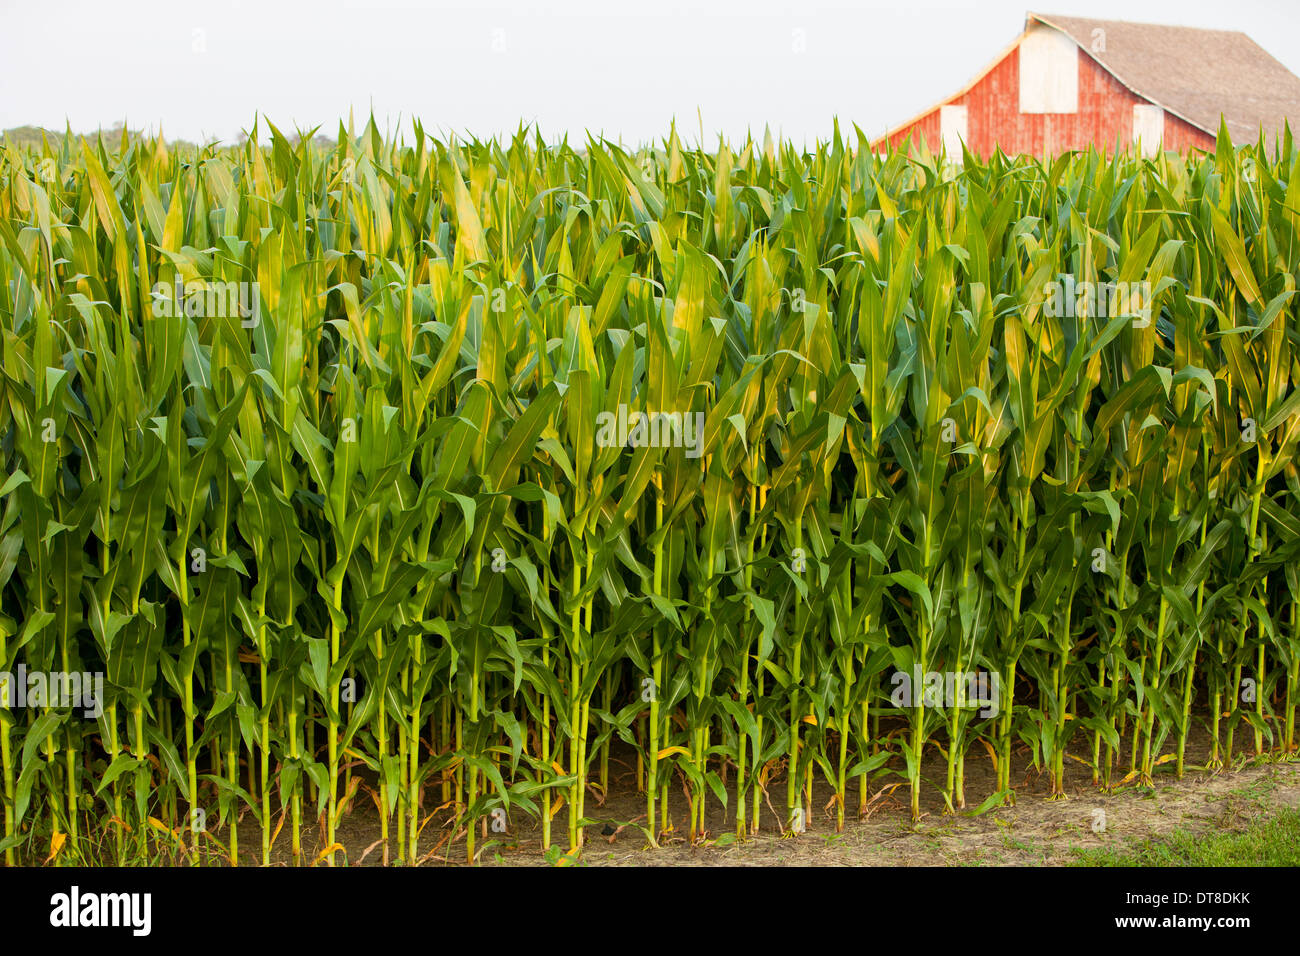 A tall corn field in Central Illinois. Stock Photo